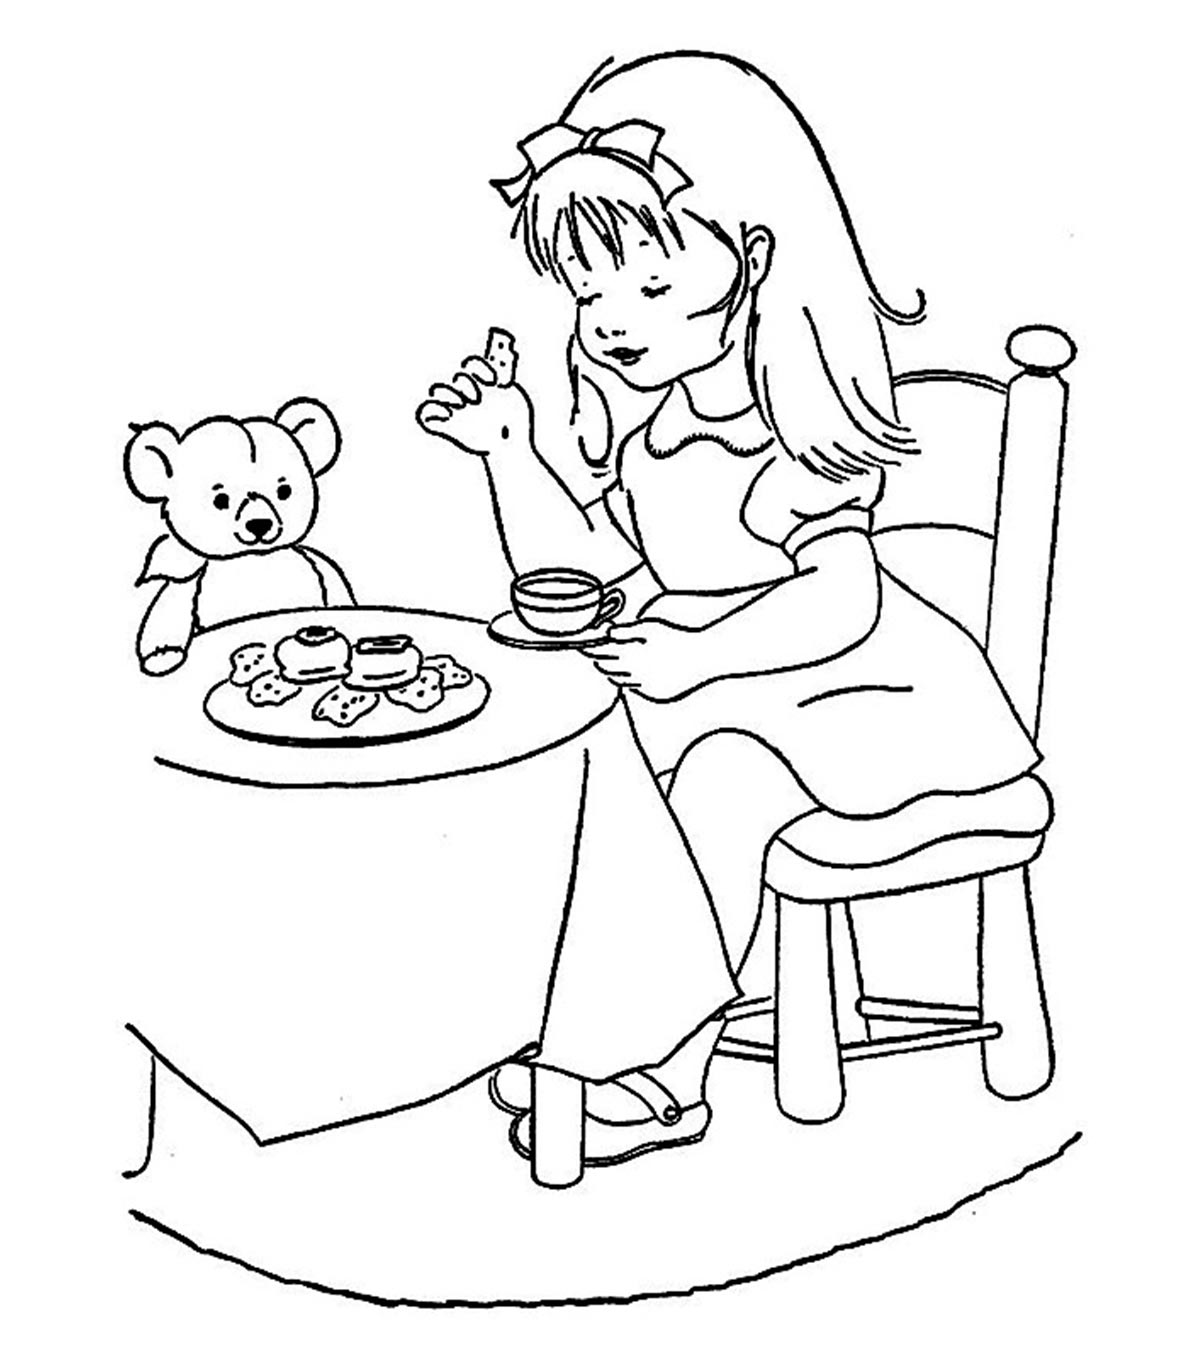 Top 10 Goldilocks And The Three Bears Coloring Pages Your Toddler Will Love_image